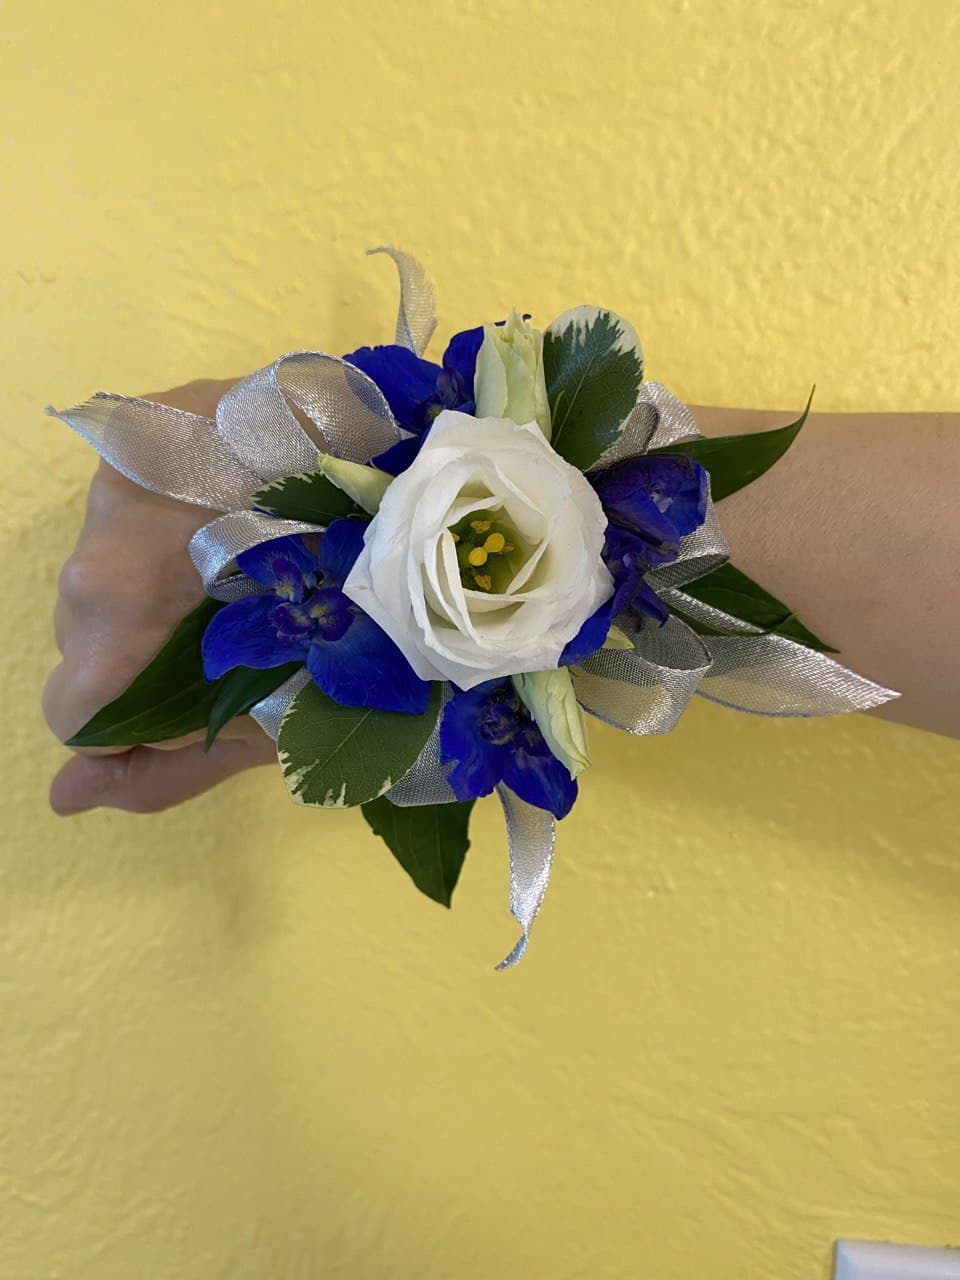  Touch of blue corsage - A combination of white lisianthus and blue delphinium, on a silver ribbon. Perfect for prom and wedding.